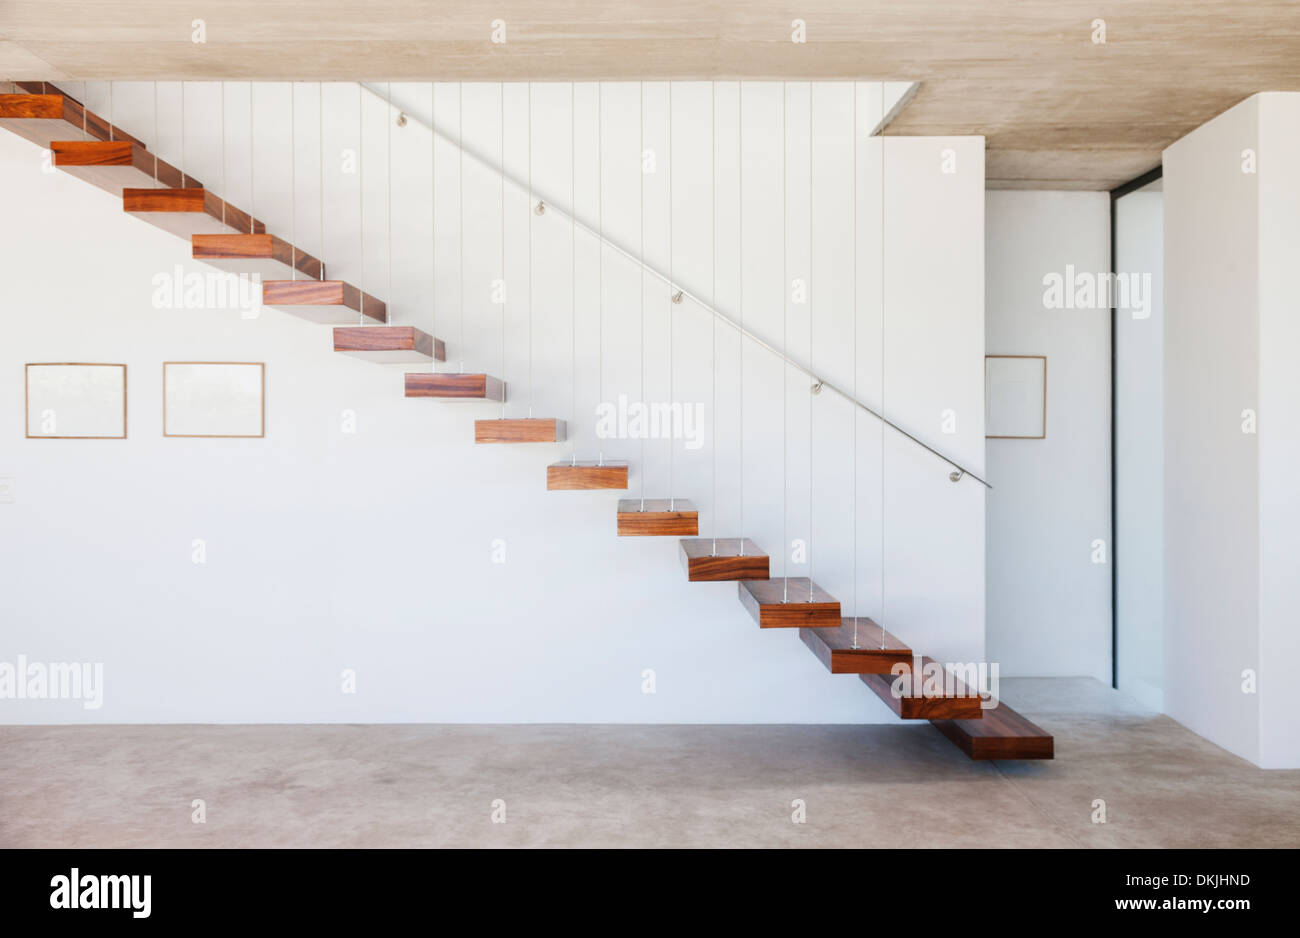 Floating staircase in modern house Stock Photo - Alamy